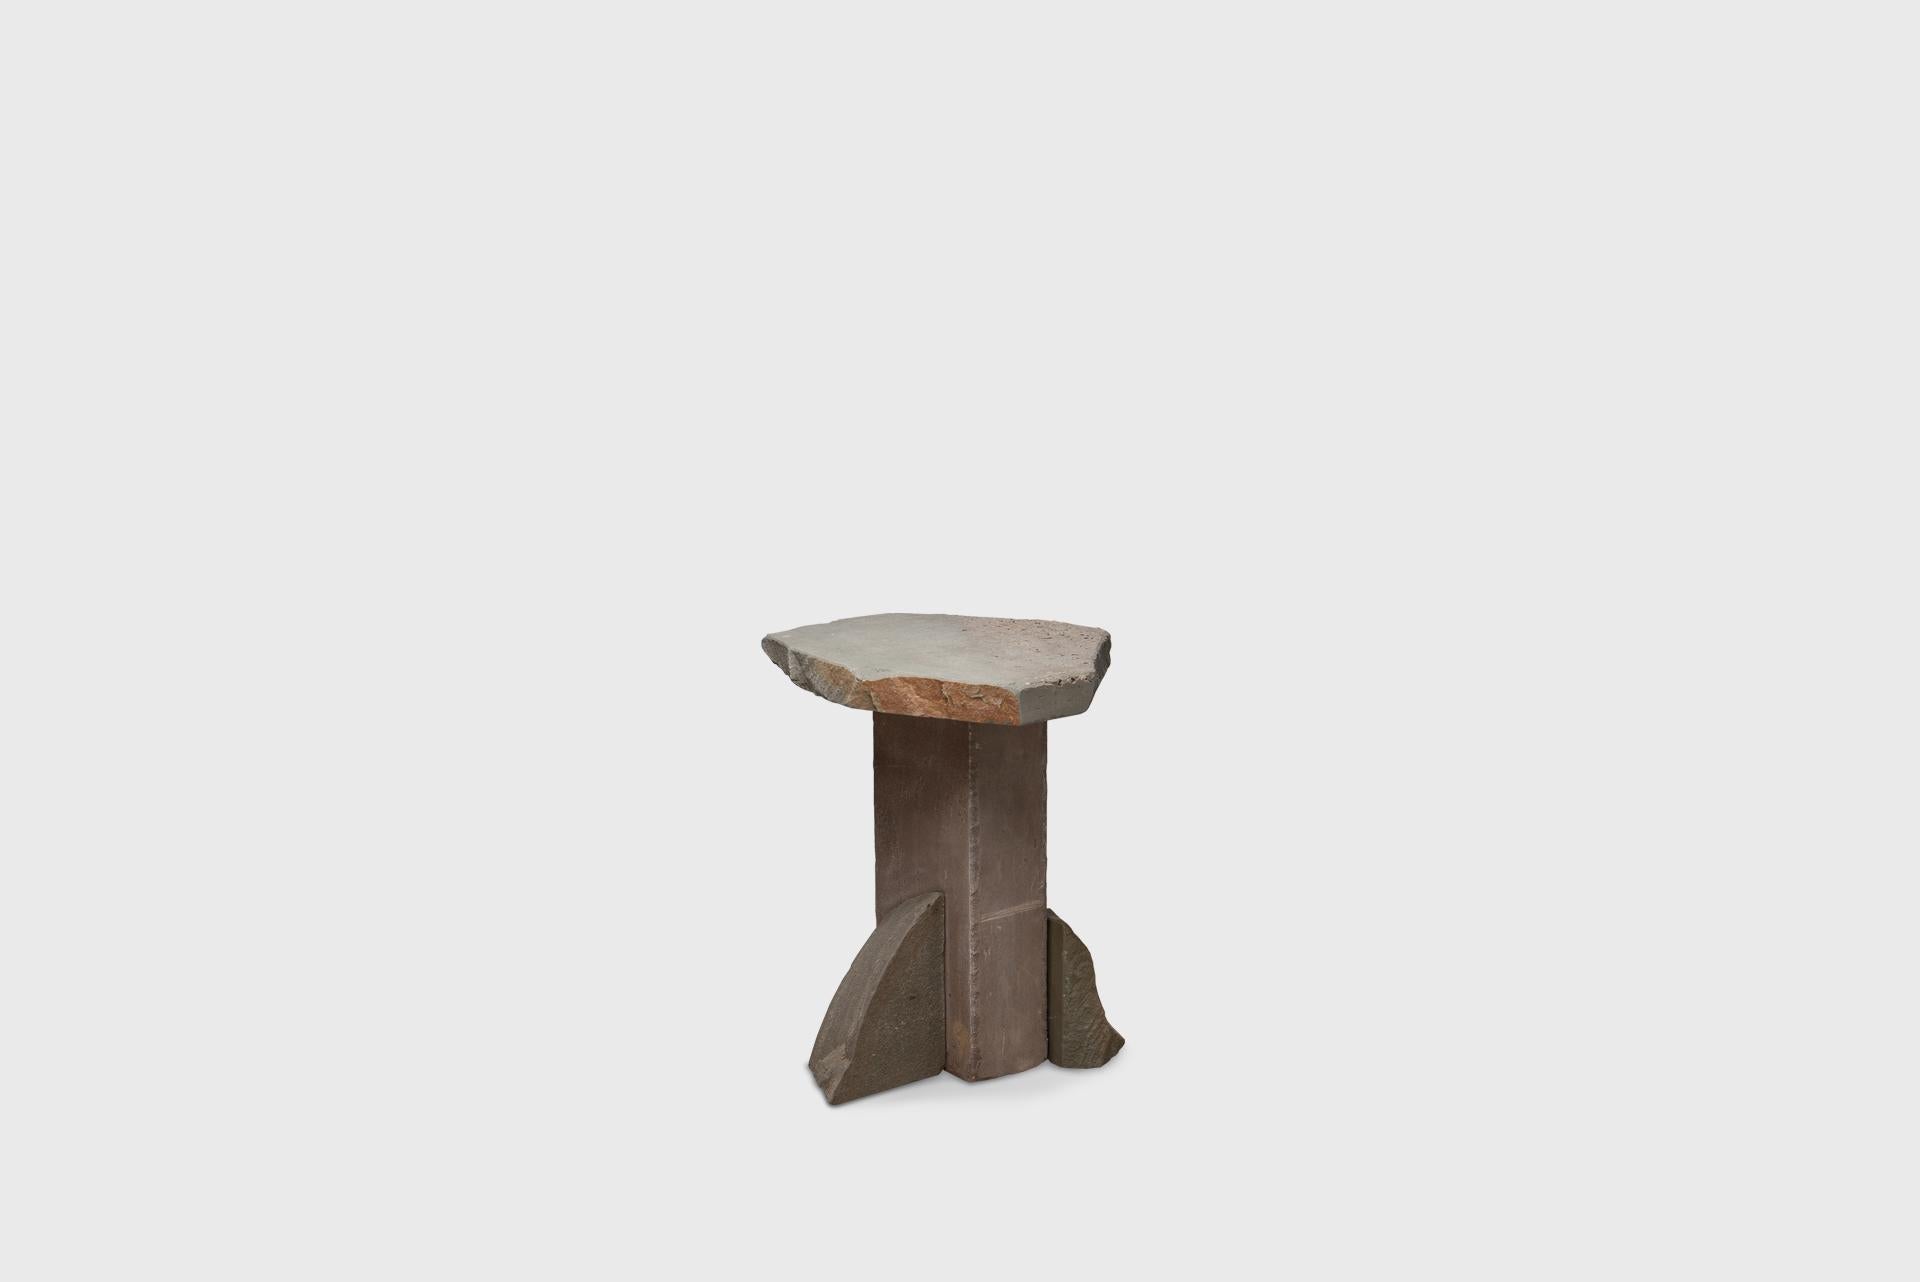 German Contemporary Side Table 1, Graywacke Offcut Gray Stone, Carsten in Der Elst For Sale